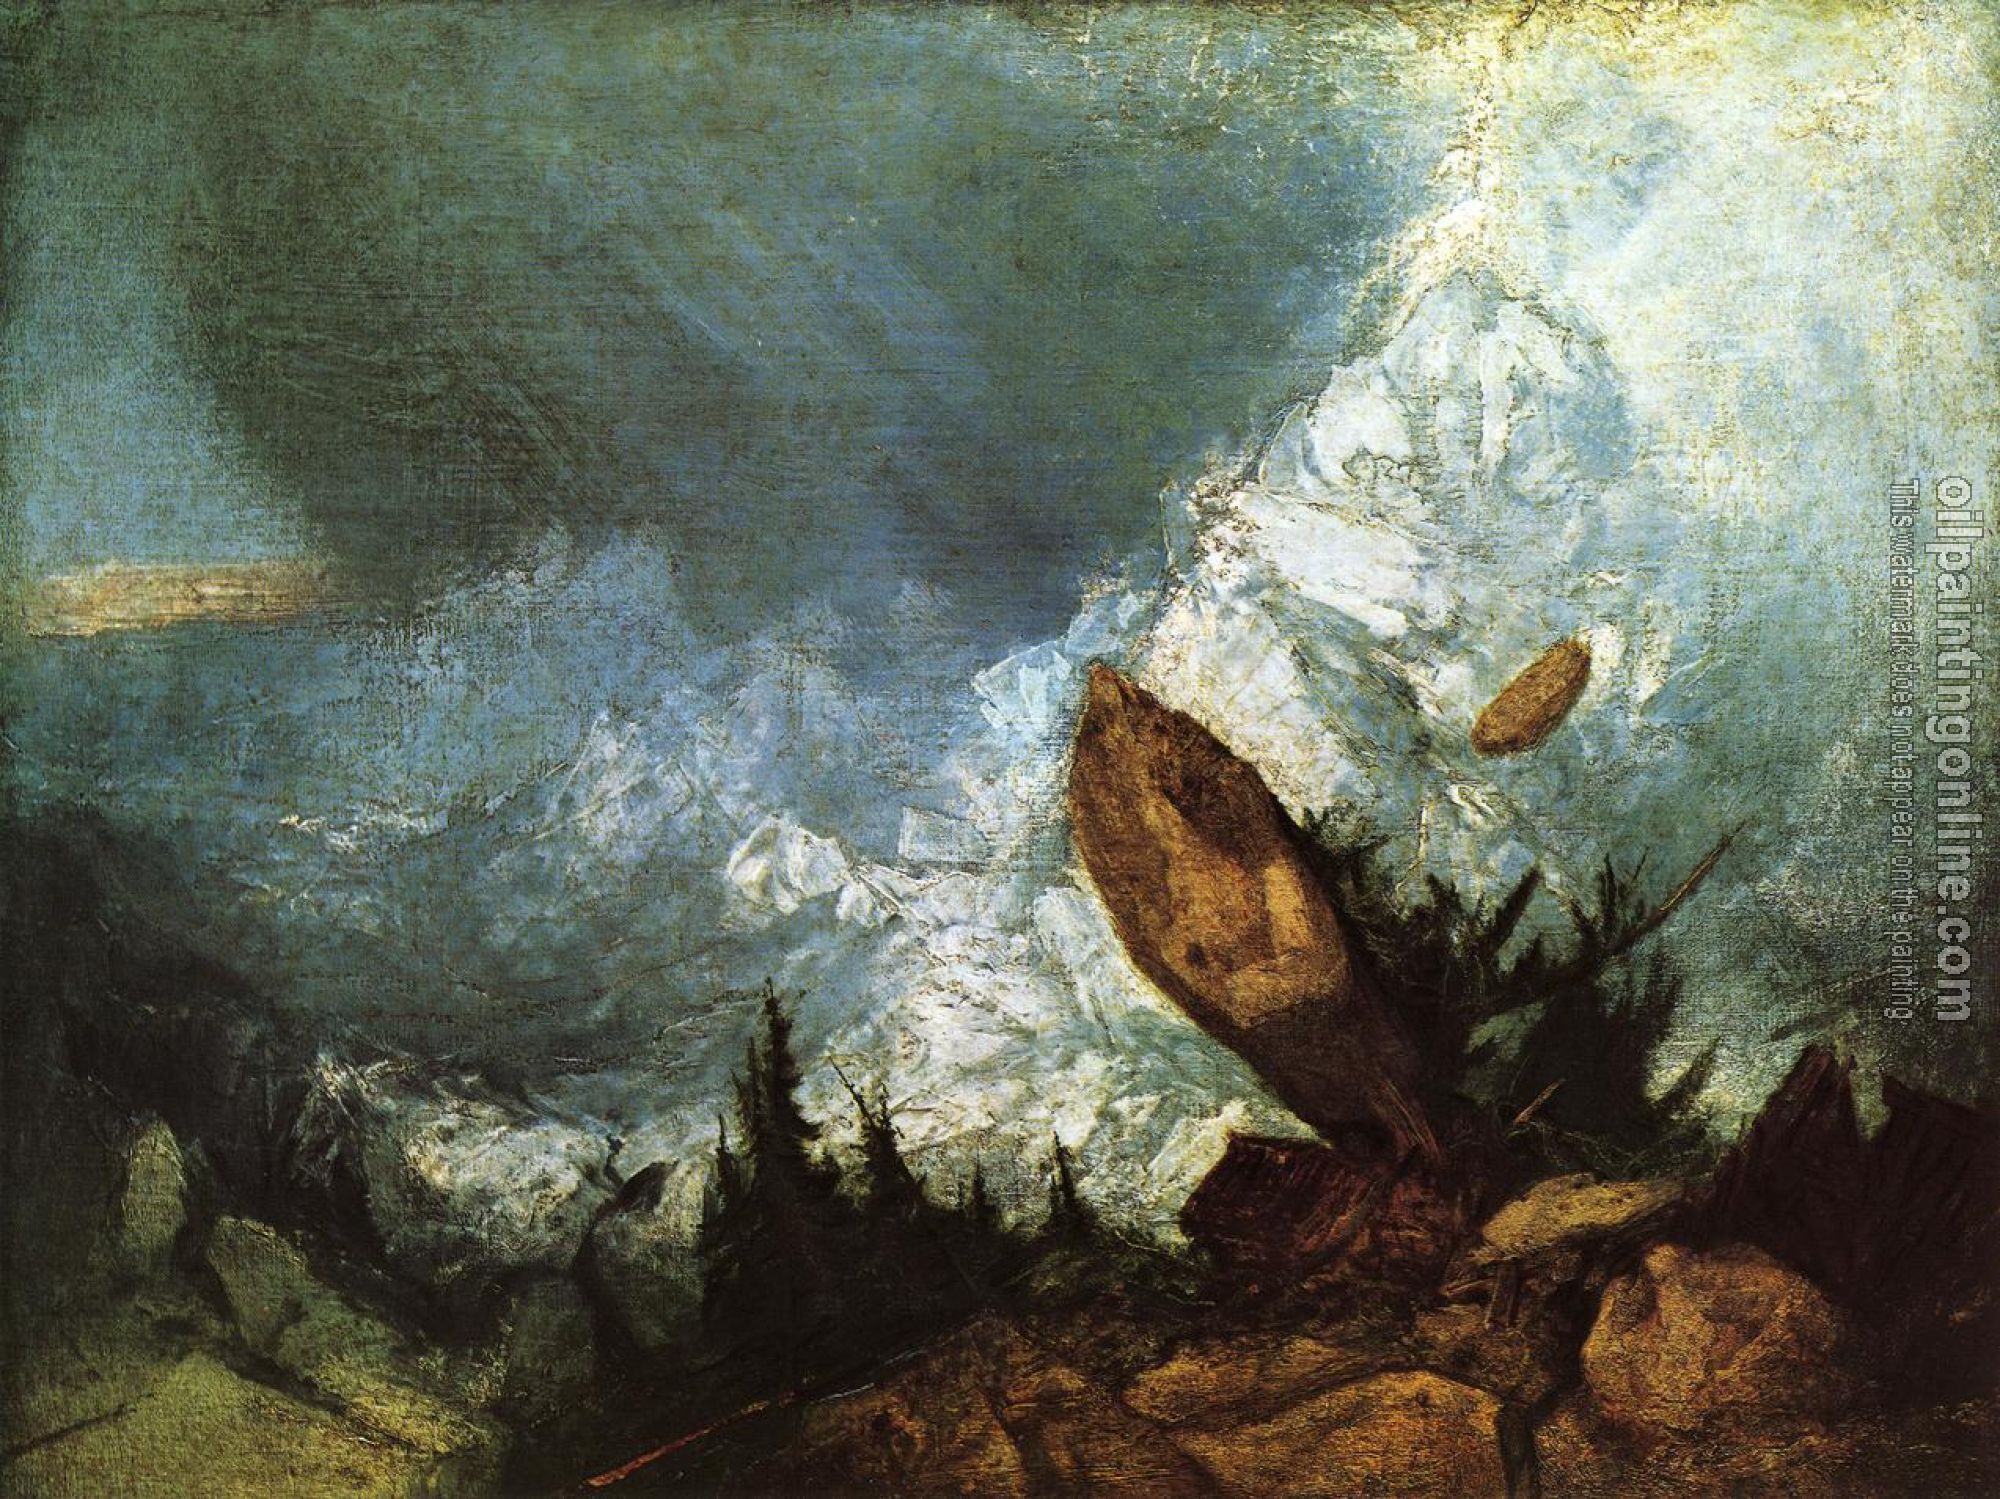 Turner, Joseph Mallord William - The Fall of an Avalanche in the Grisons